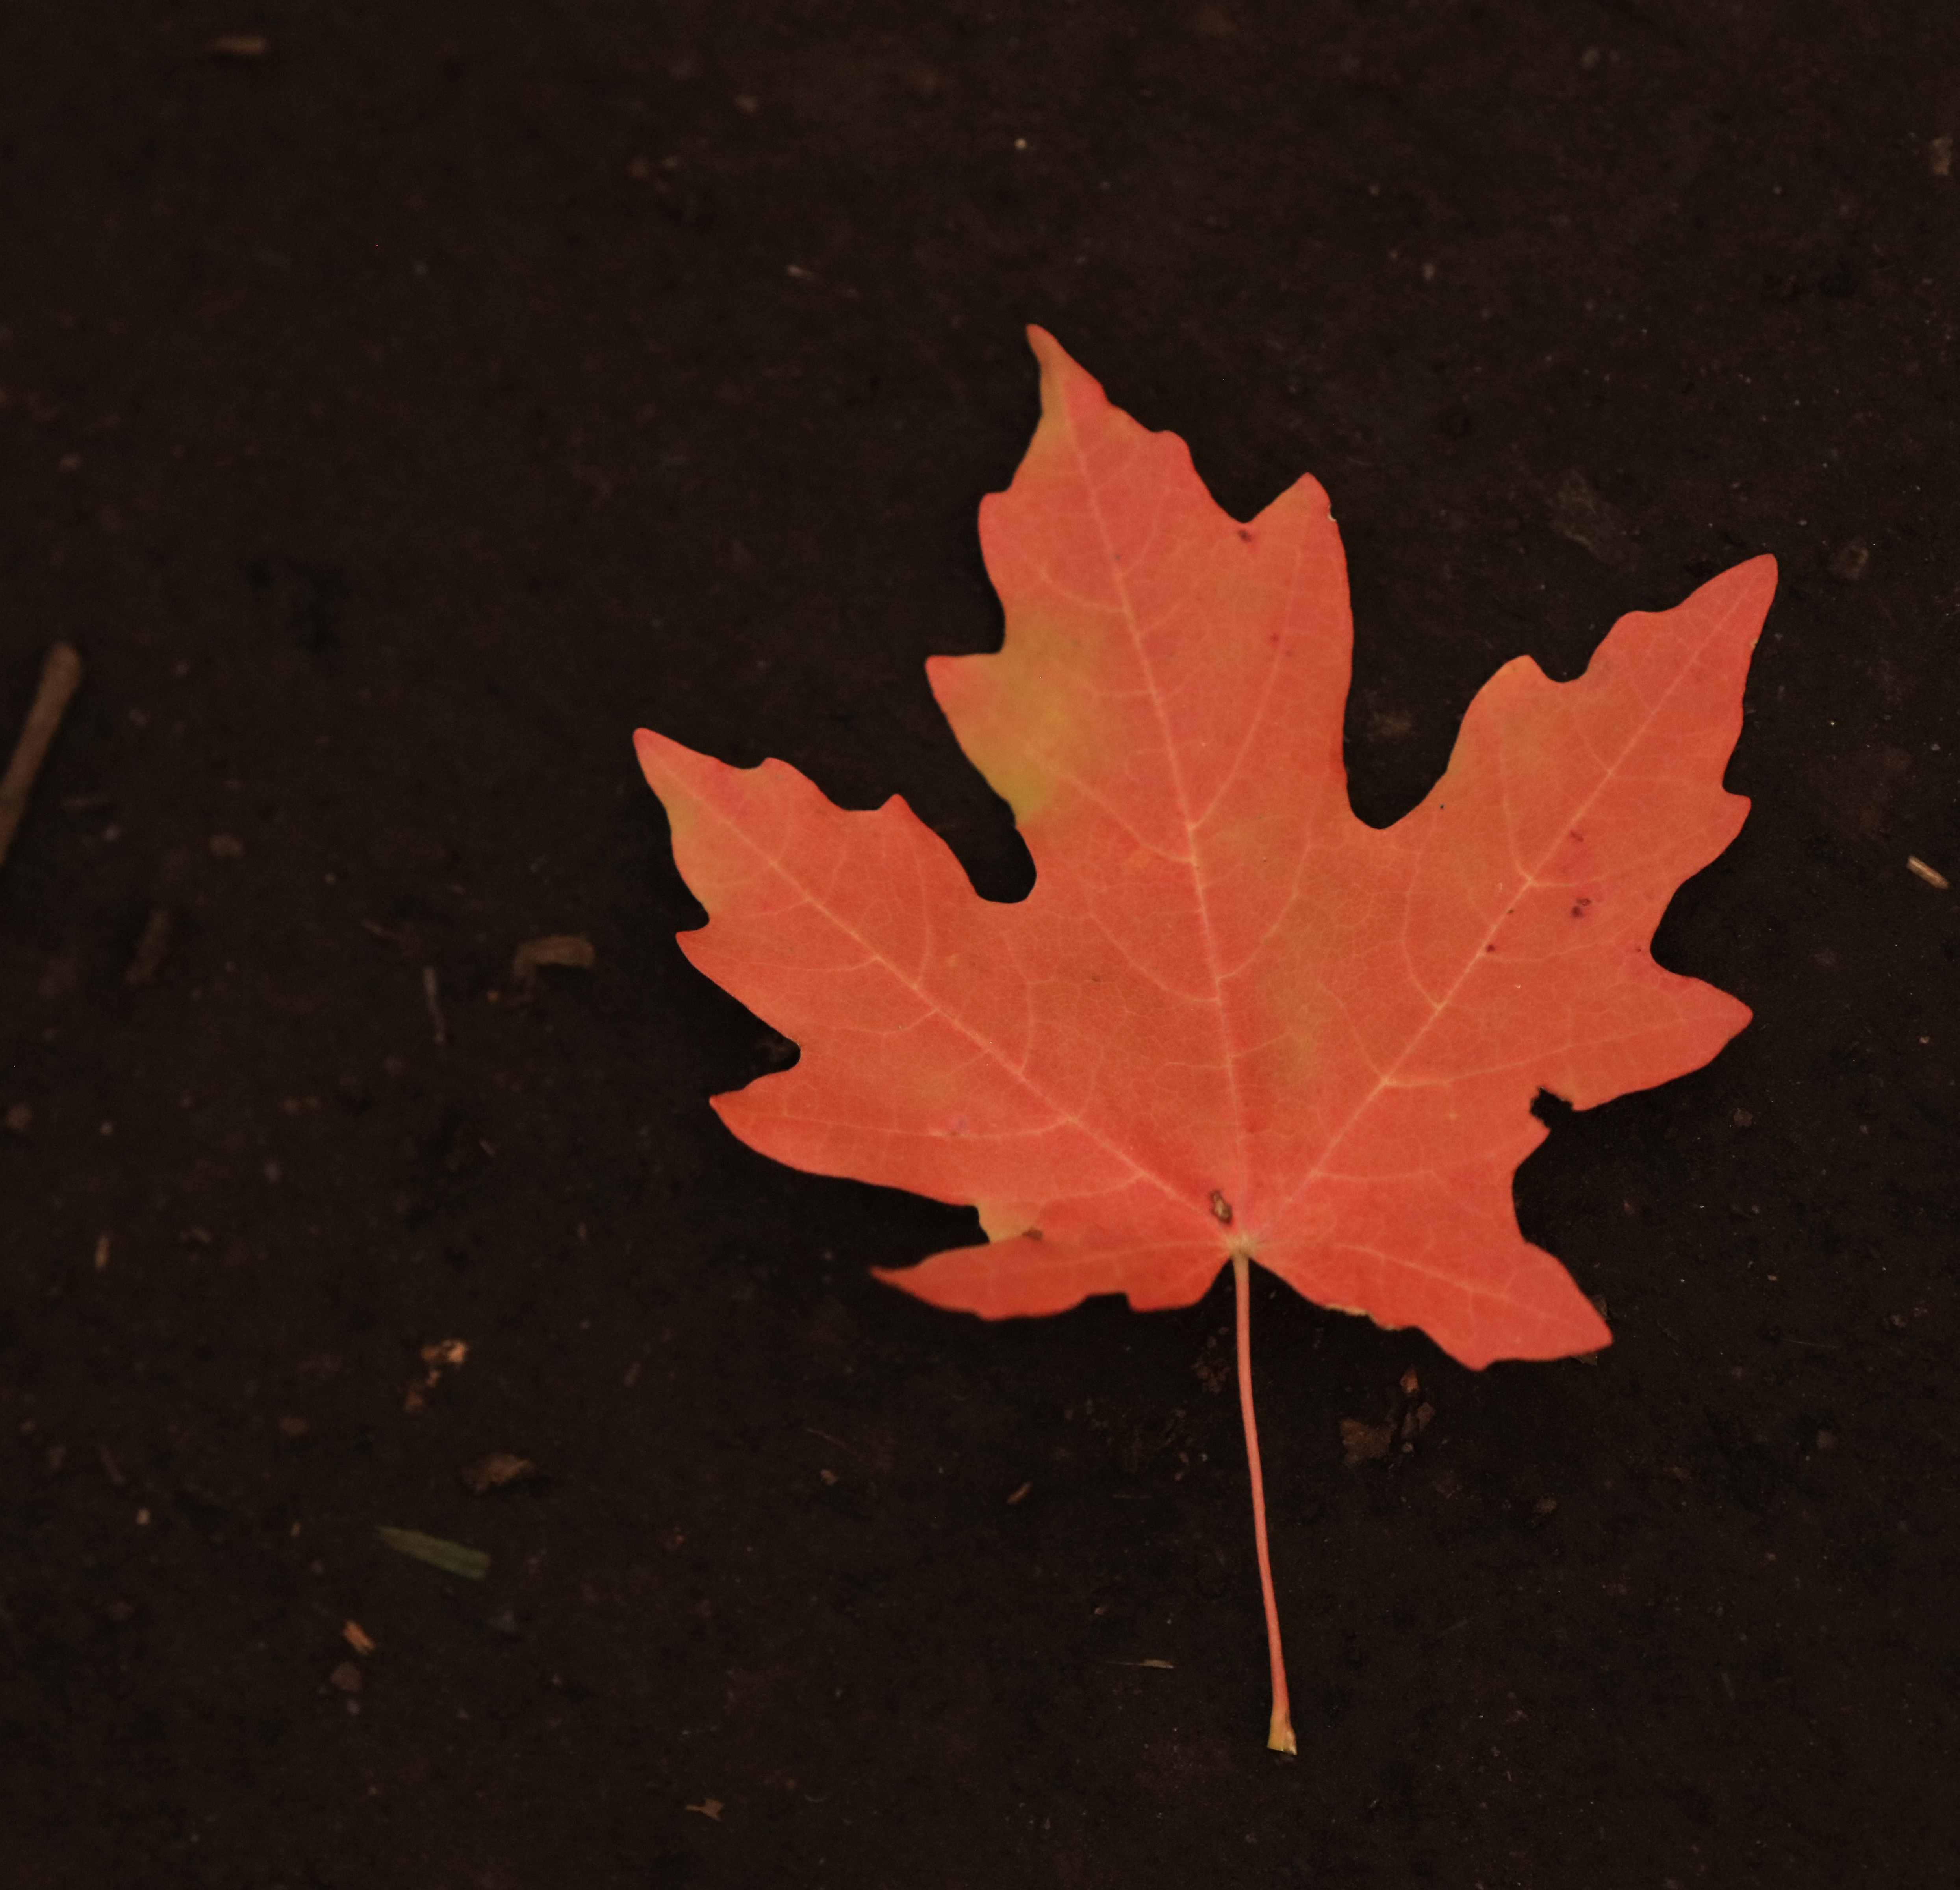 An image of a red maple leaf